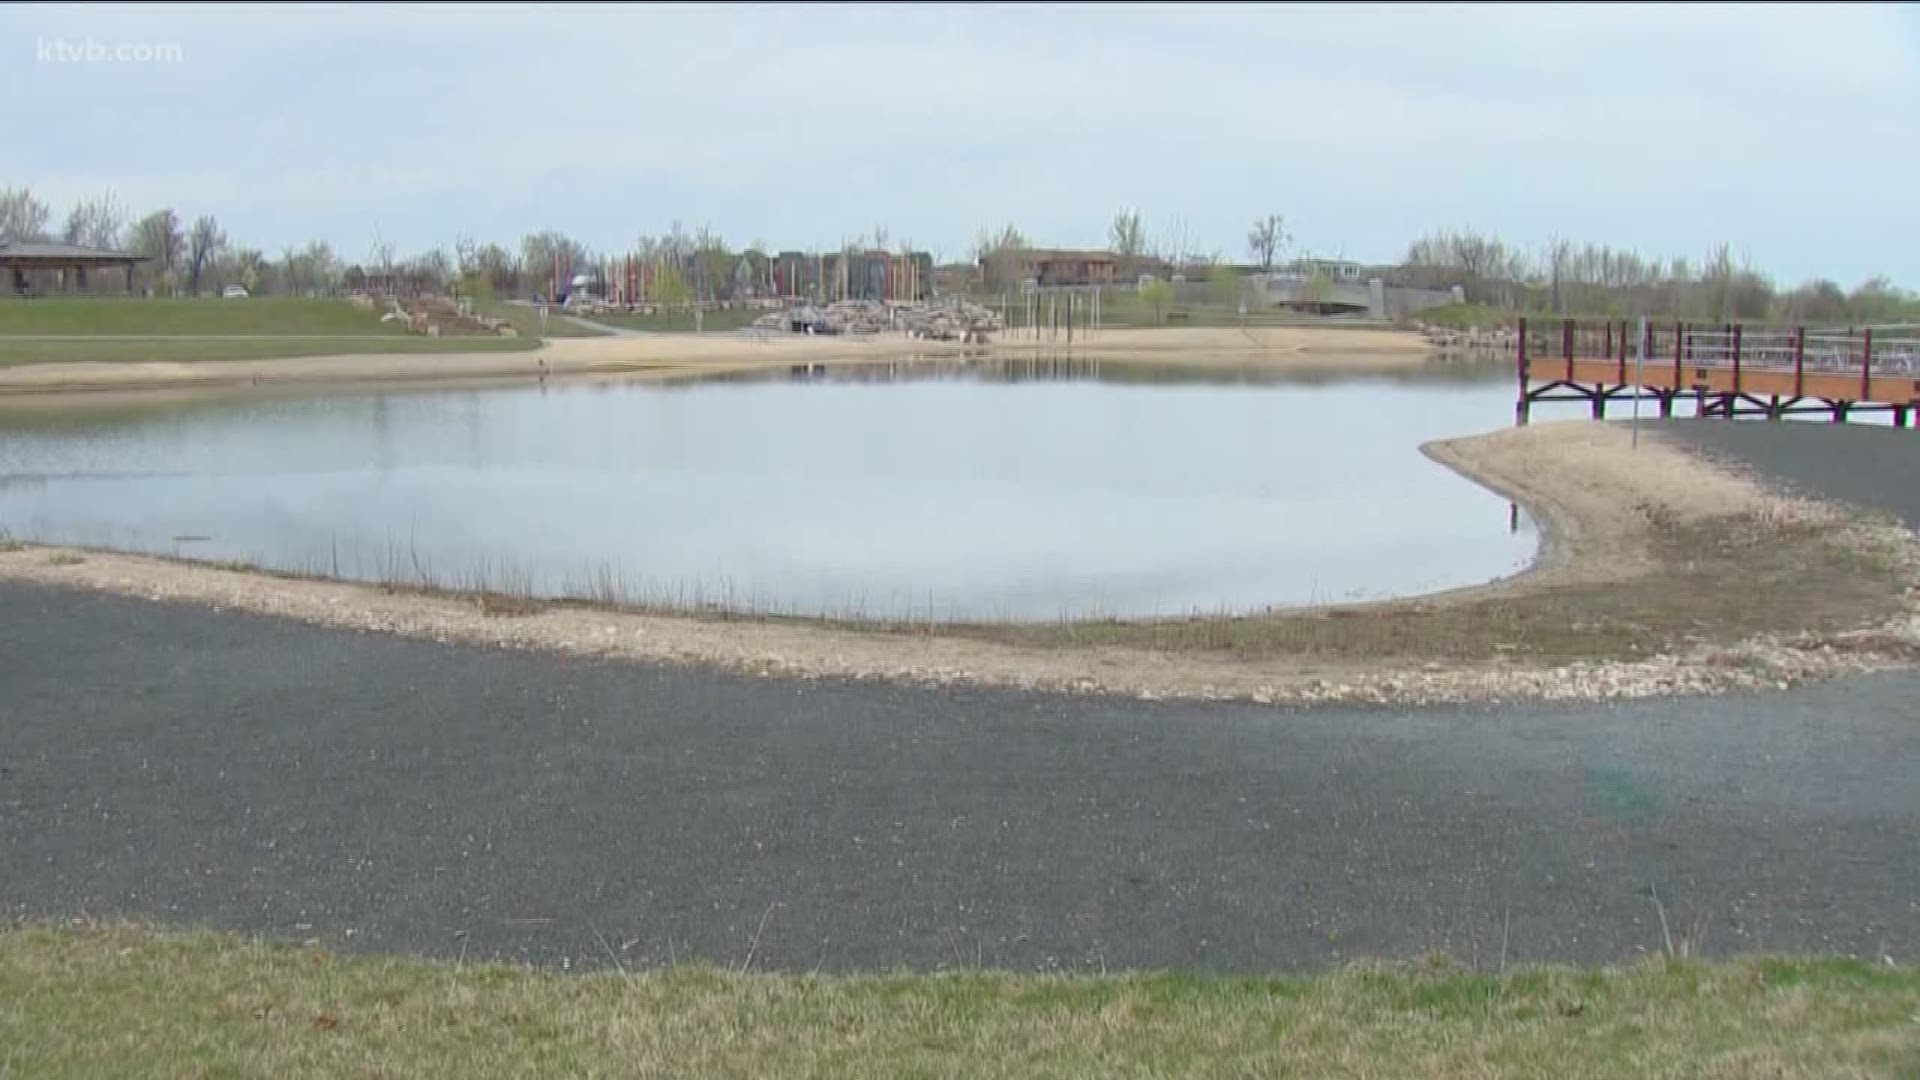 Several measures are in place to keep the ponds safe for humans.